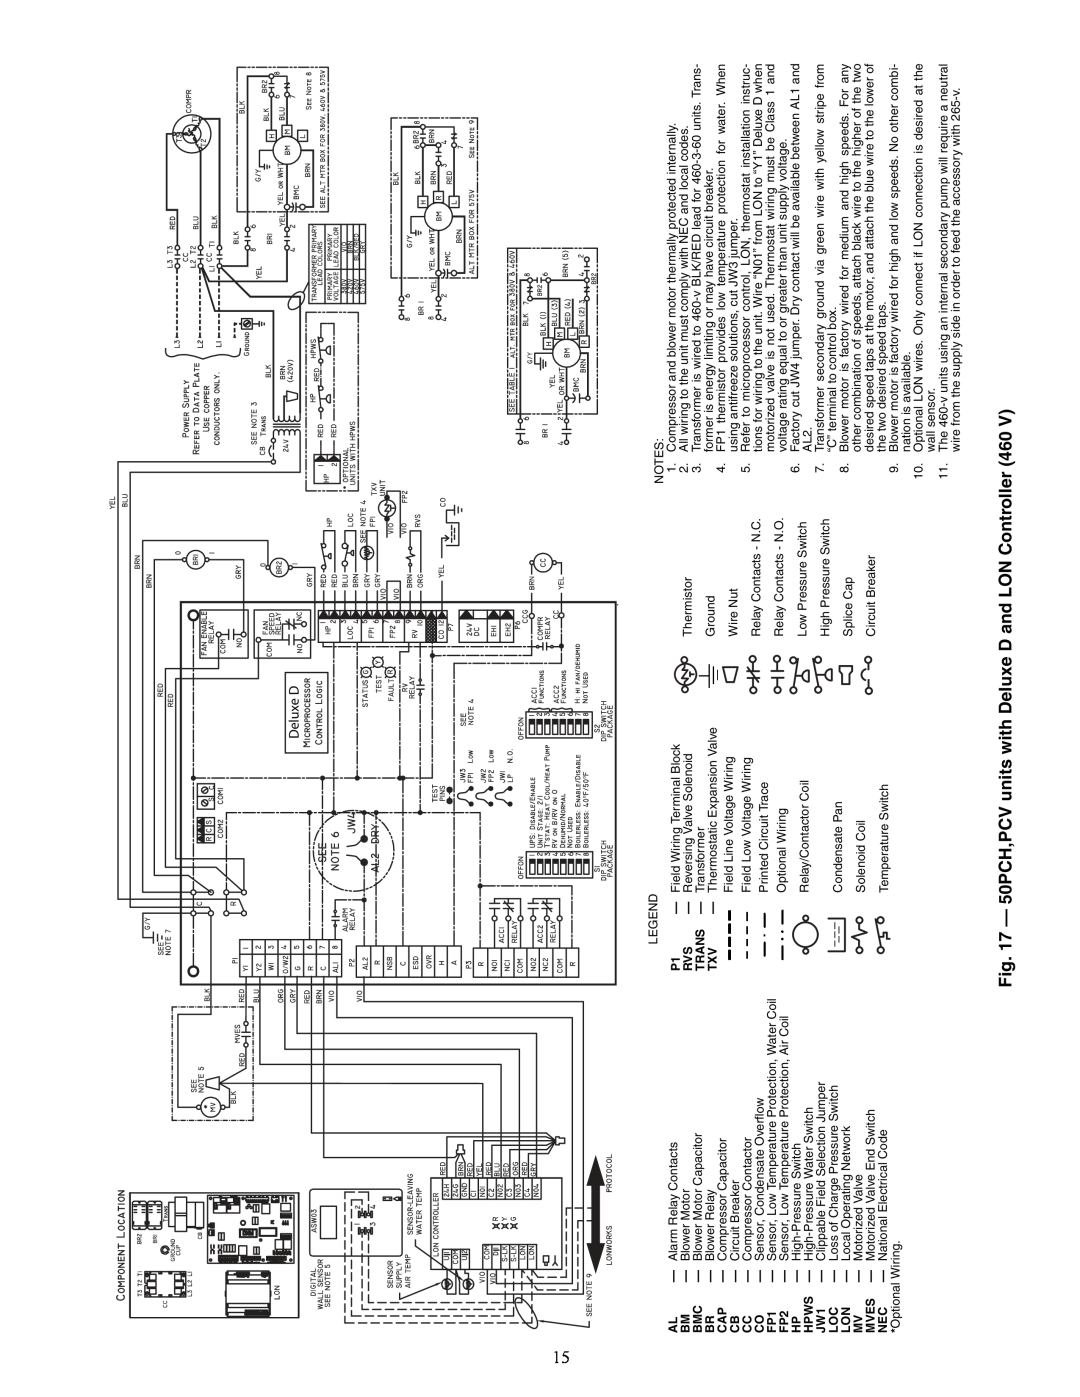 Carrier PCV015-060 specifications a50-8440, Deluxe D 